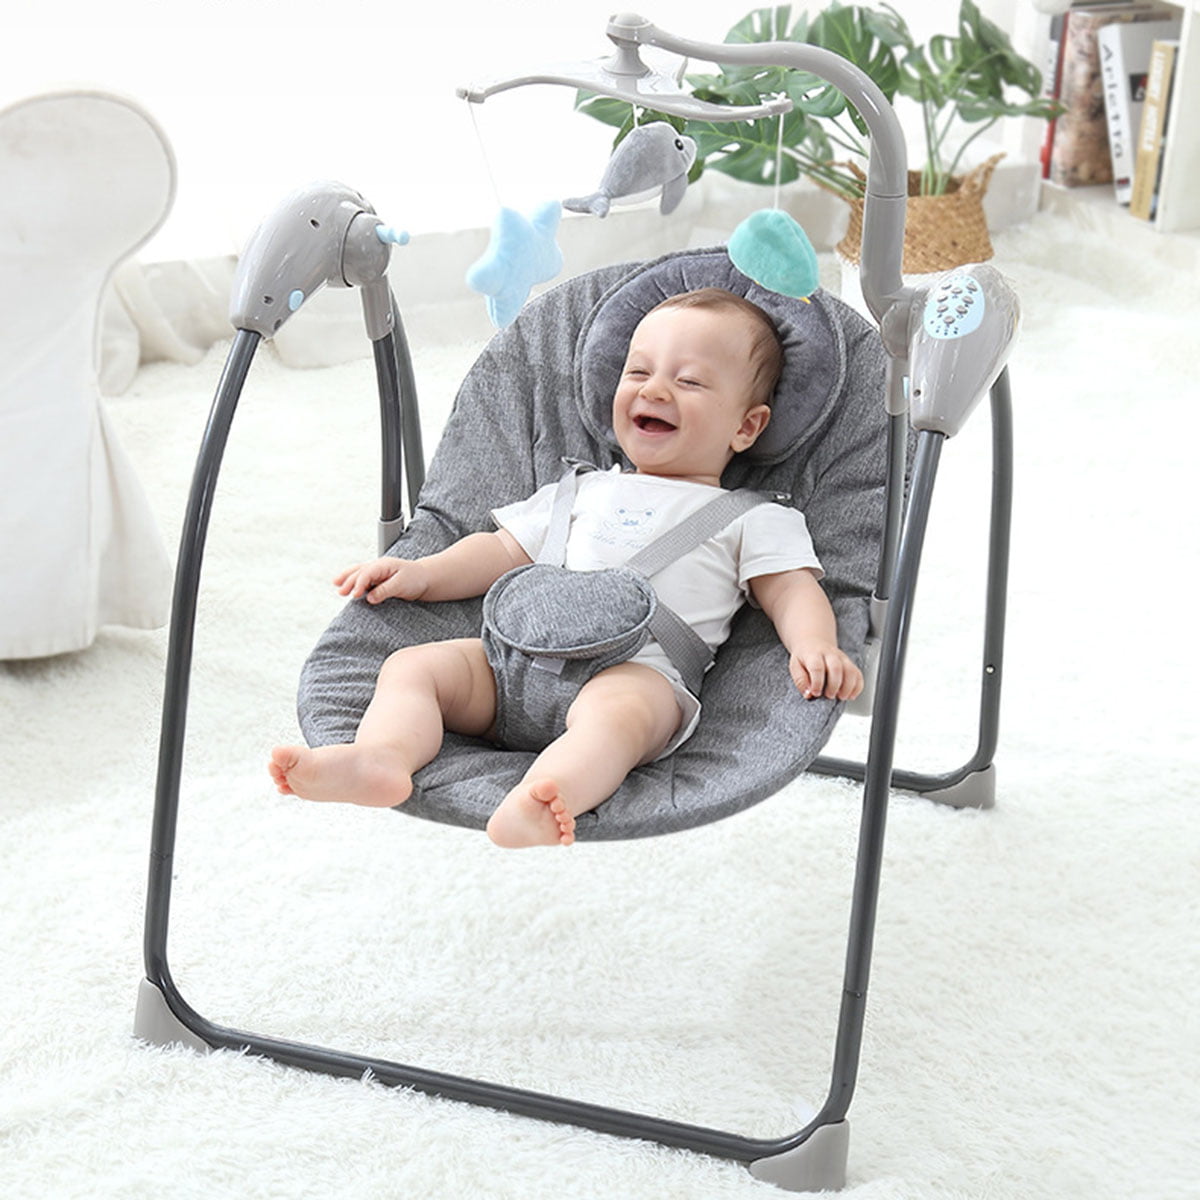 Can Be Used from The Beginning of The Newborn Brakites Soothing Portable Deluxe Swing Comfort Electric Baby Rocking Chair with Music 